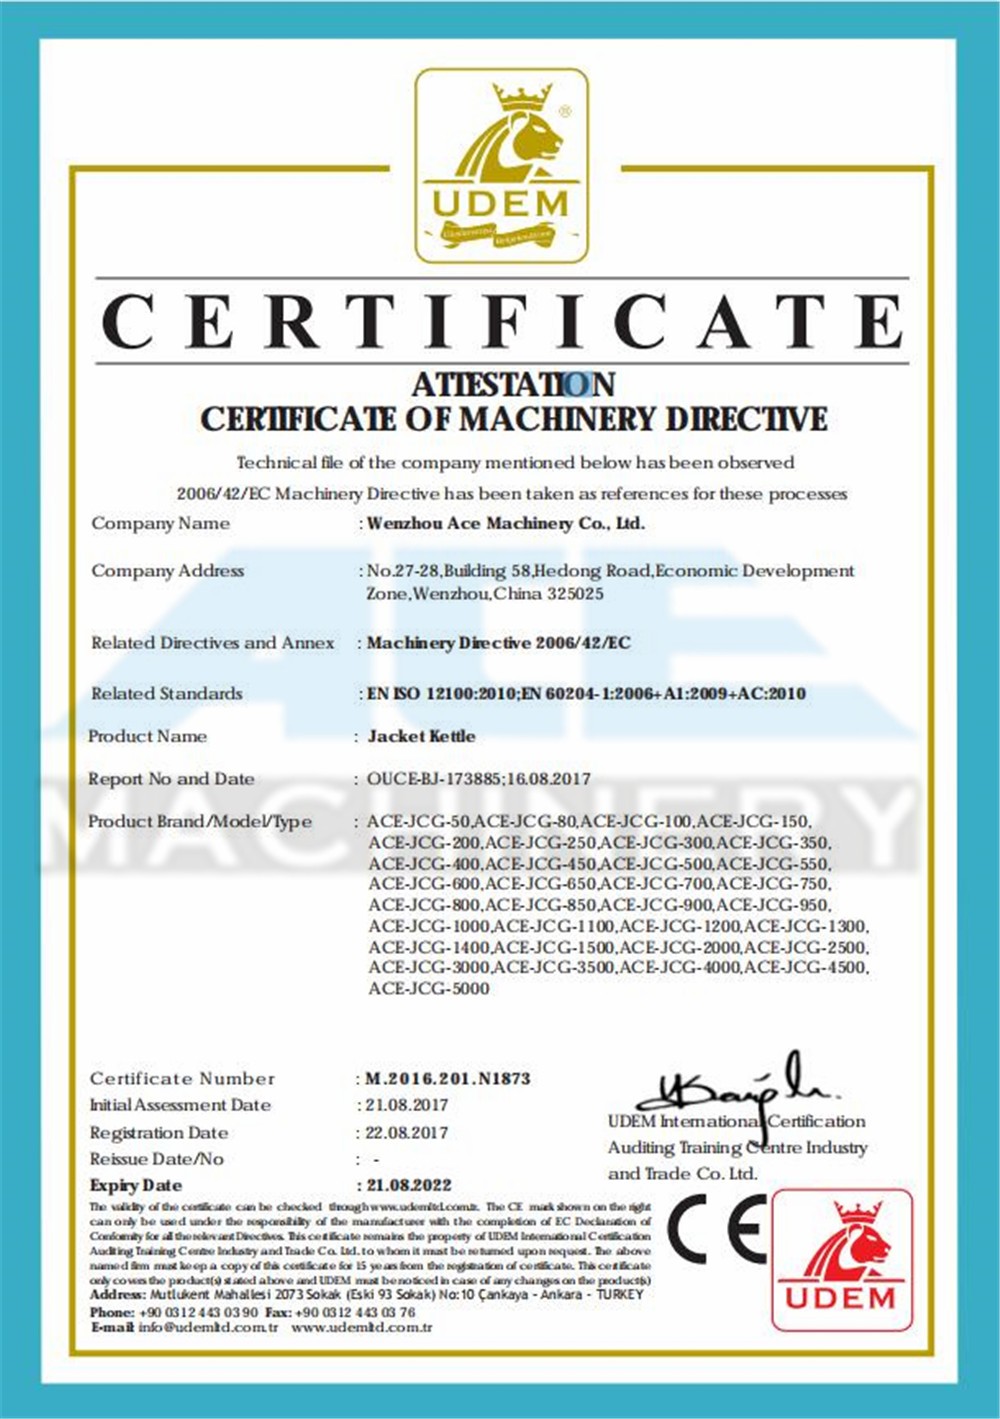 Jacketed kettle CE certificate